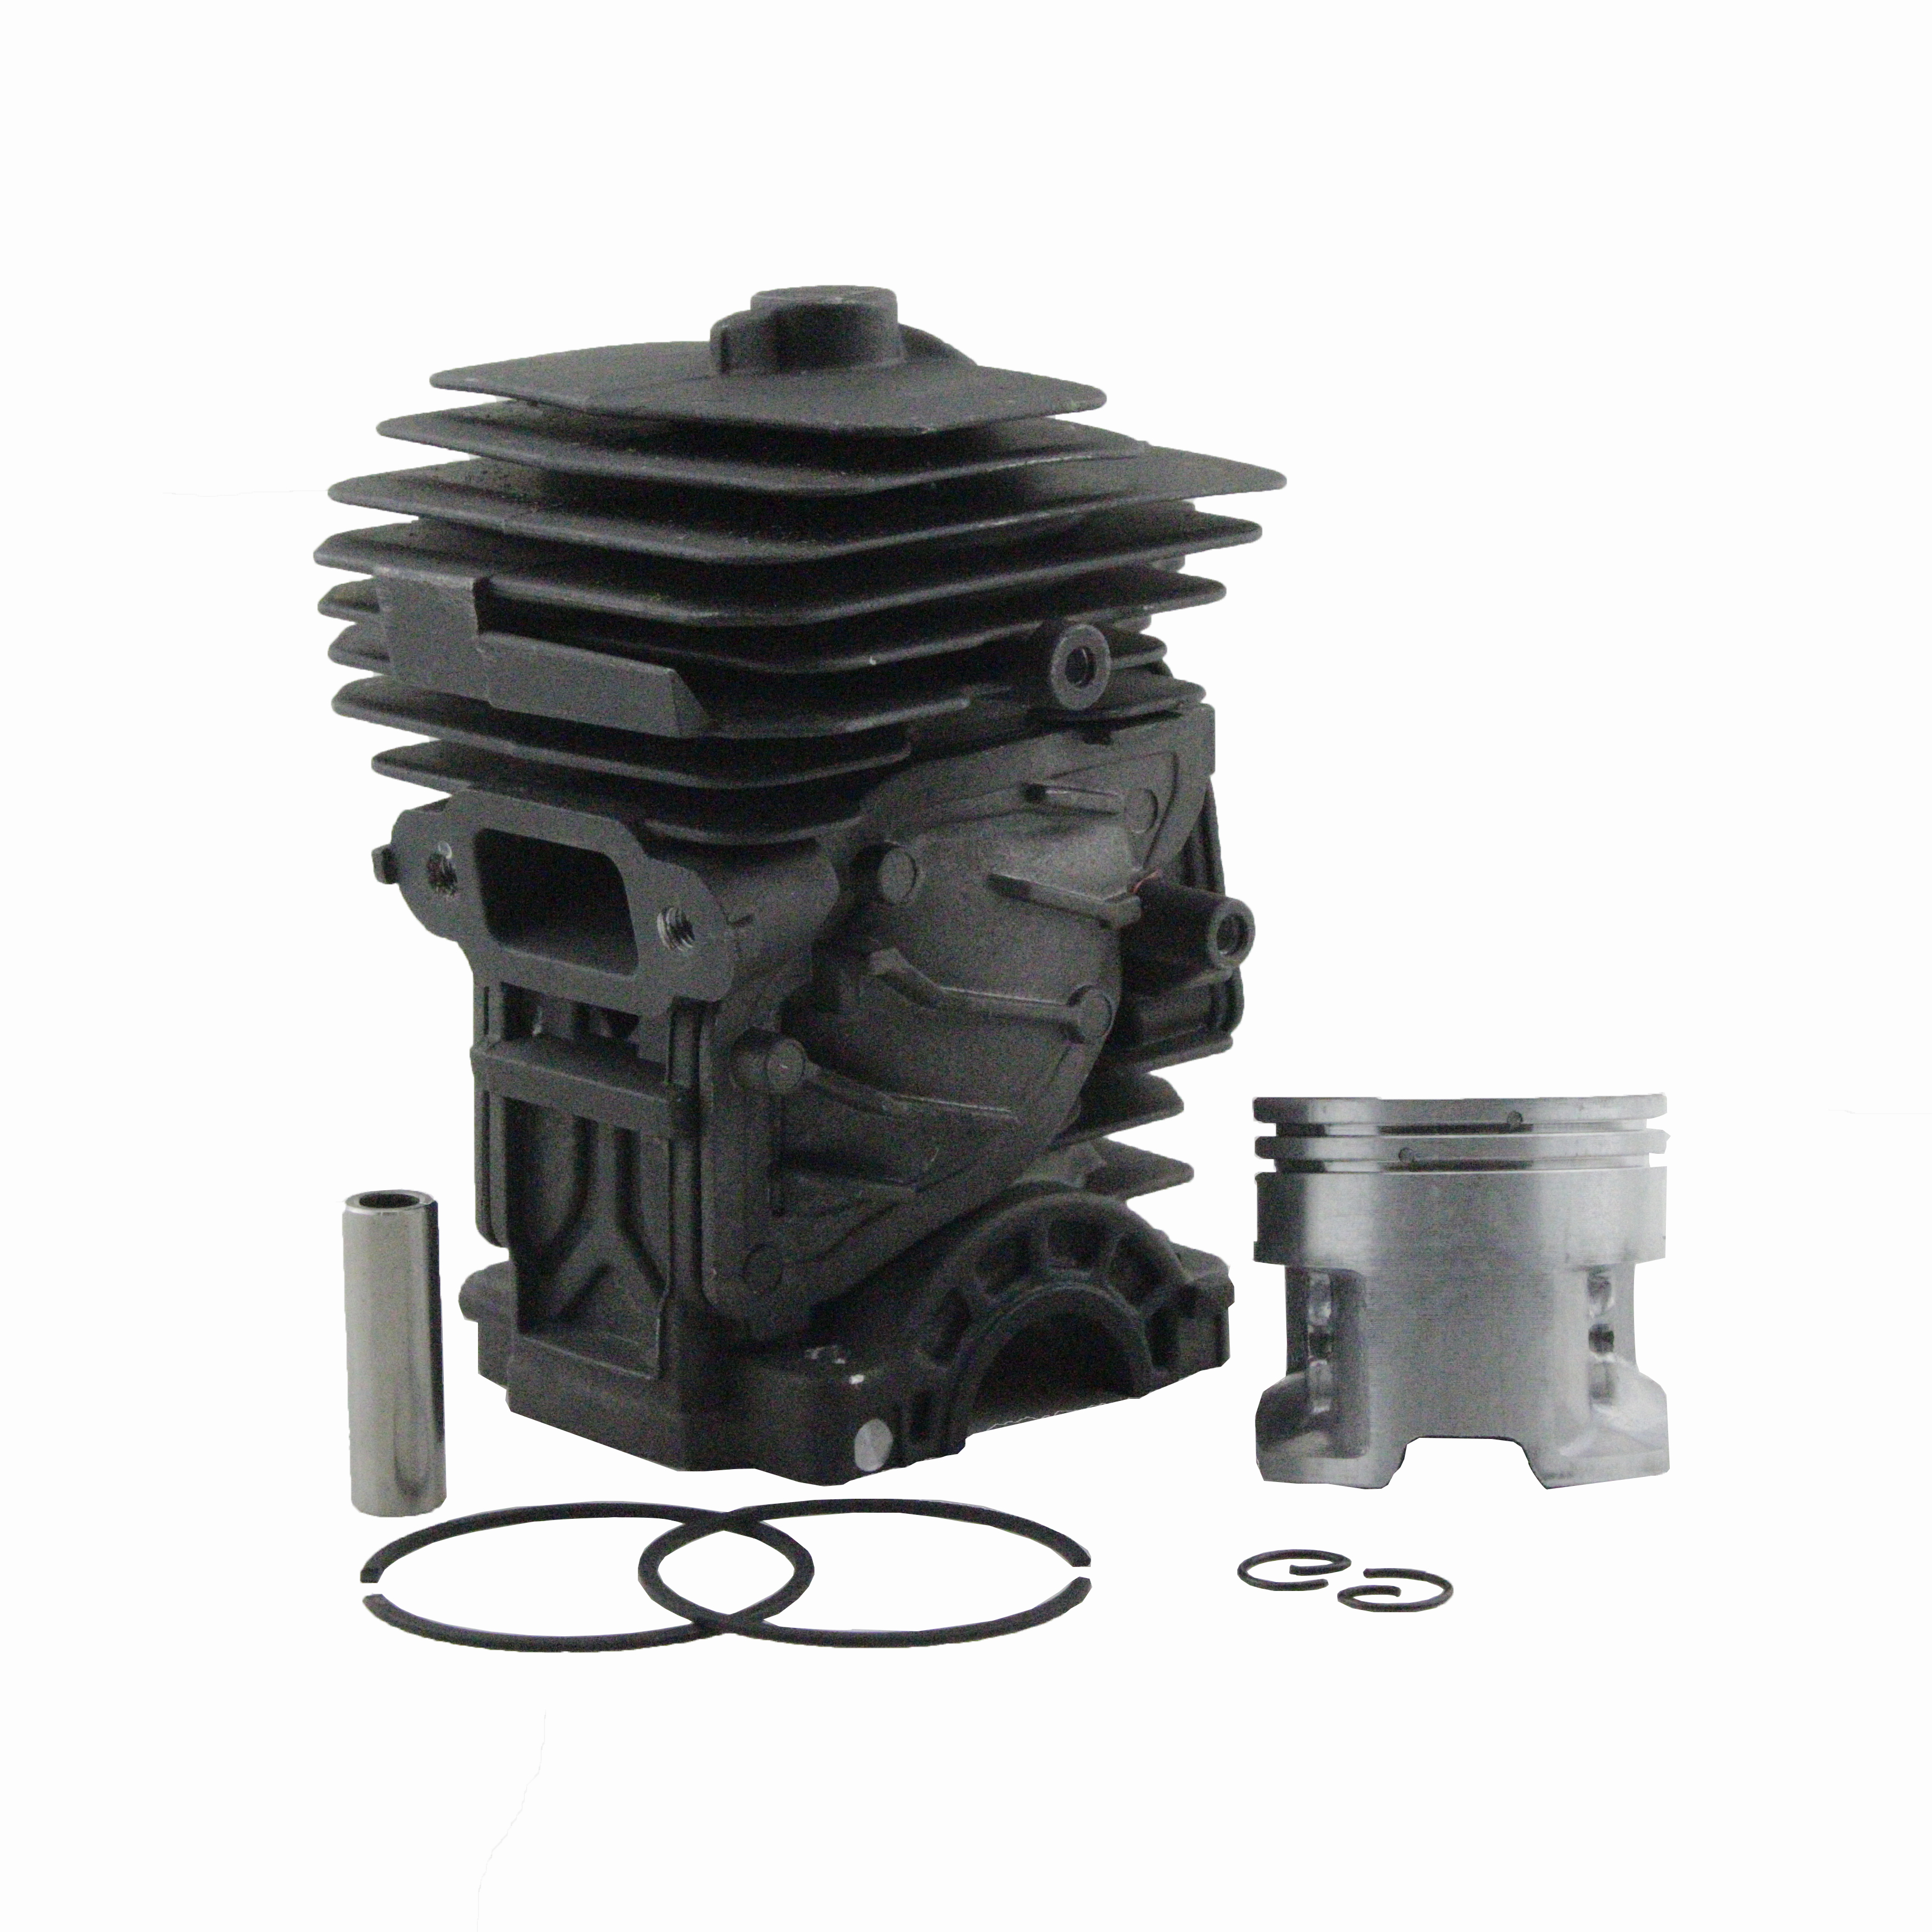 44mm Cylinder Piston Kit For Stihl MS251 Chainsaw 1143 020 1207